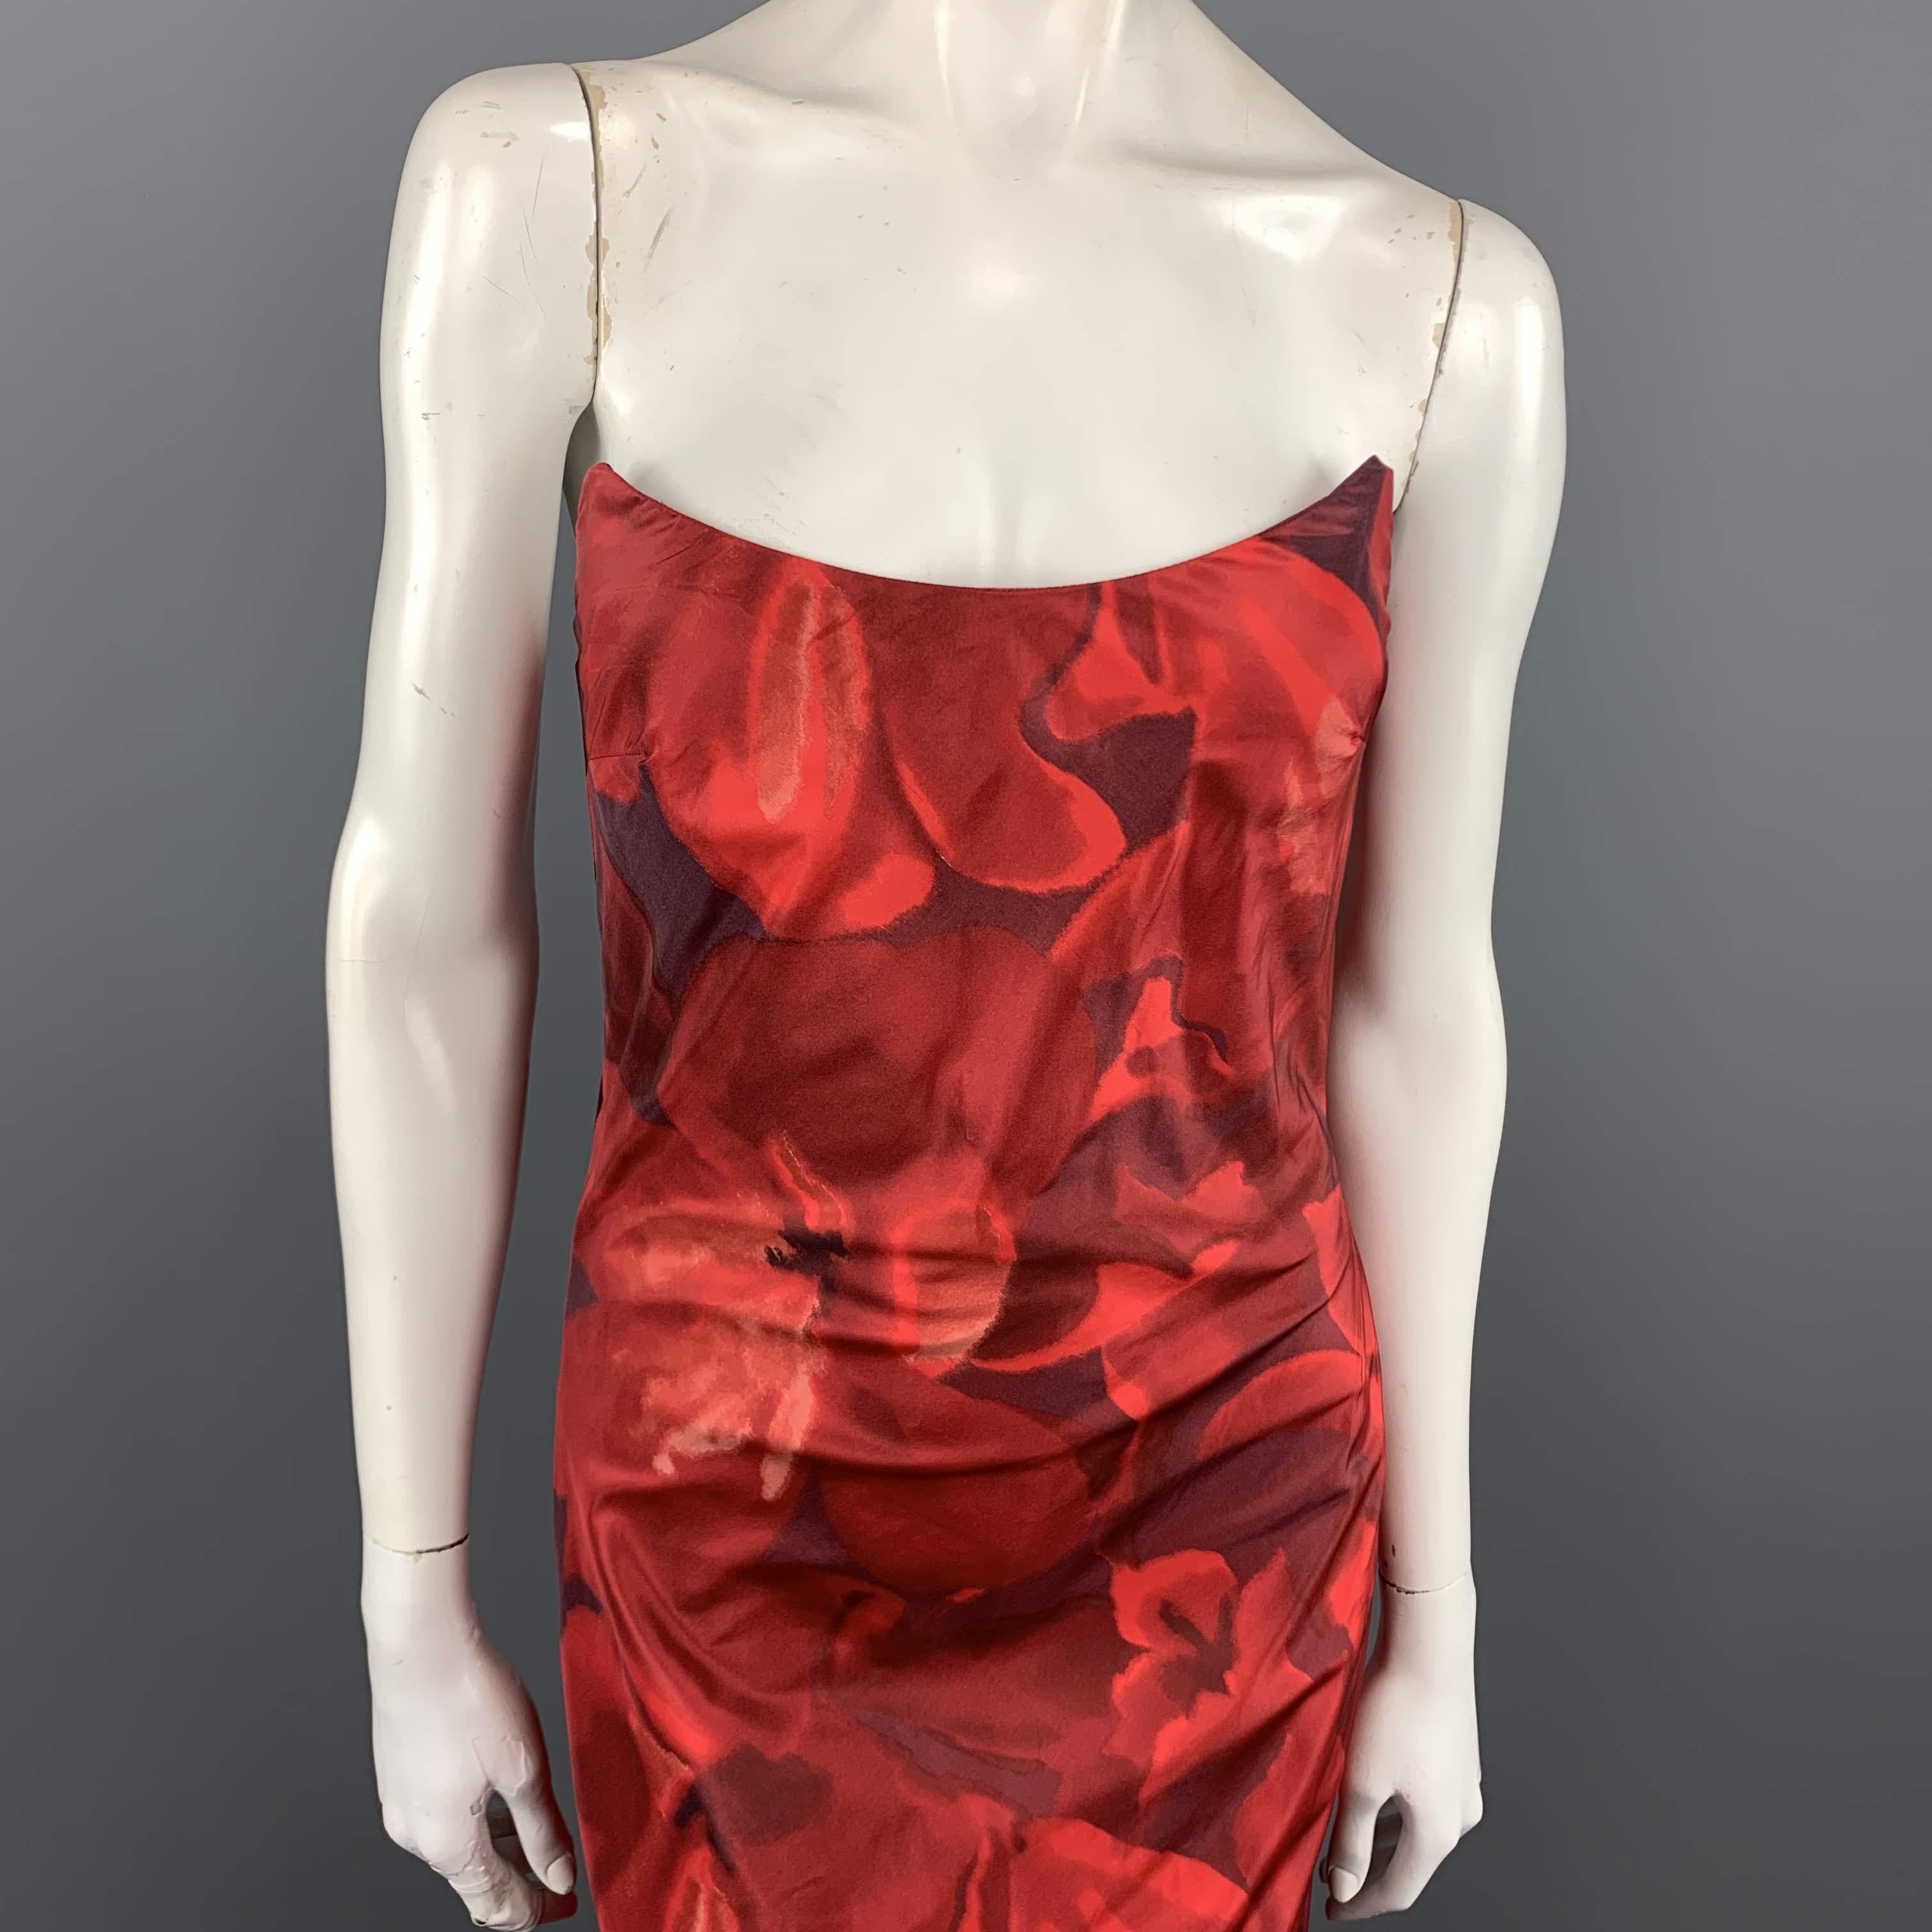 OSCAR DE LA RENTA Fall Winter 2006 gown comes in red floral print silk taffeta with a strapless pointed neckline bustier top, fitted body flared hem with train, and cascading ruffle accented back. Made in USA.
 
Excellent Pre-Owned